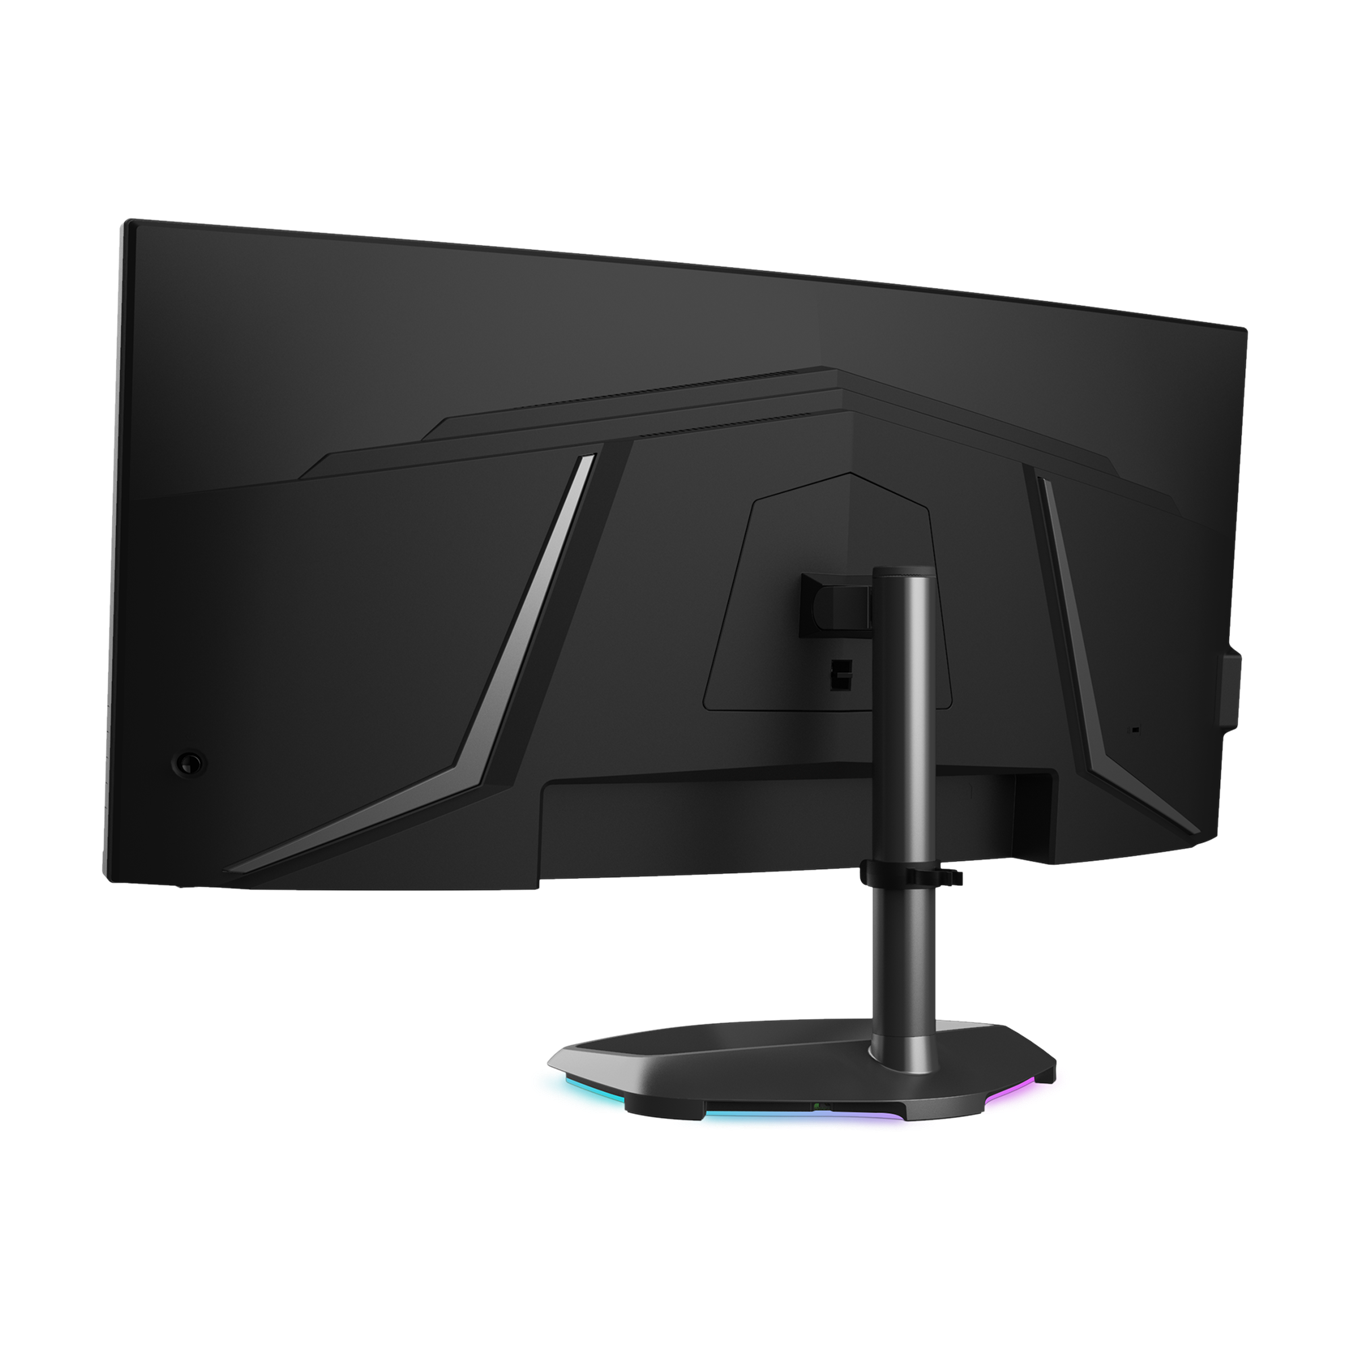 GM34-CWQ ARGB 34" Curved Gaming Monitor - Has a clean design with minimal branding that can fit perfectly in any setup